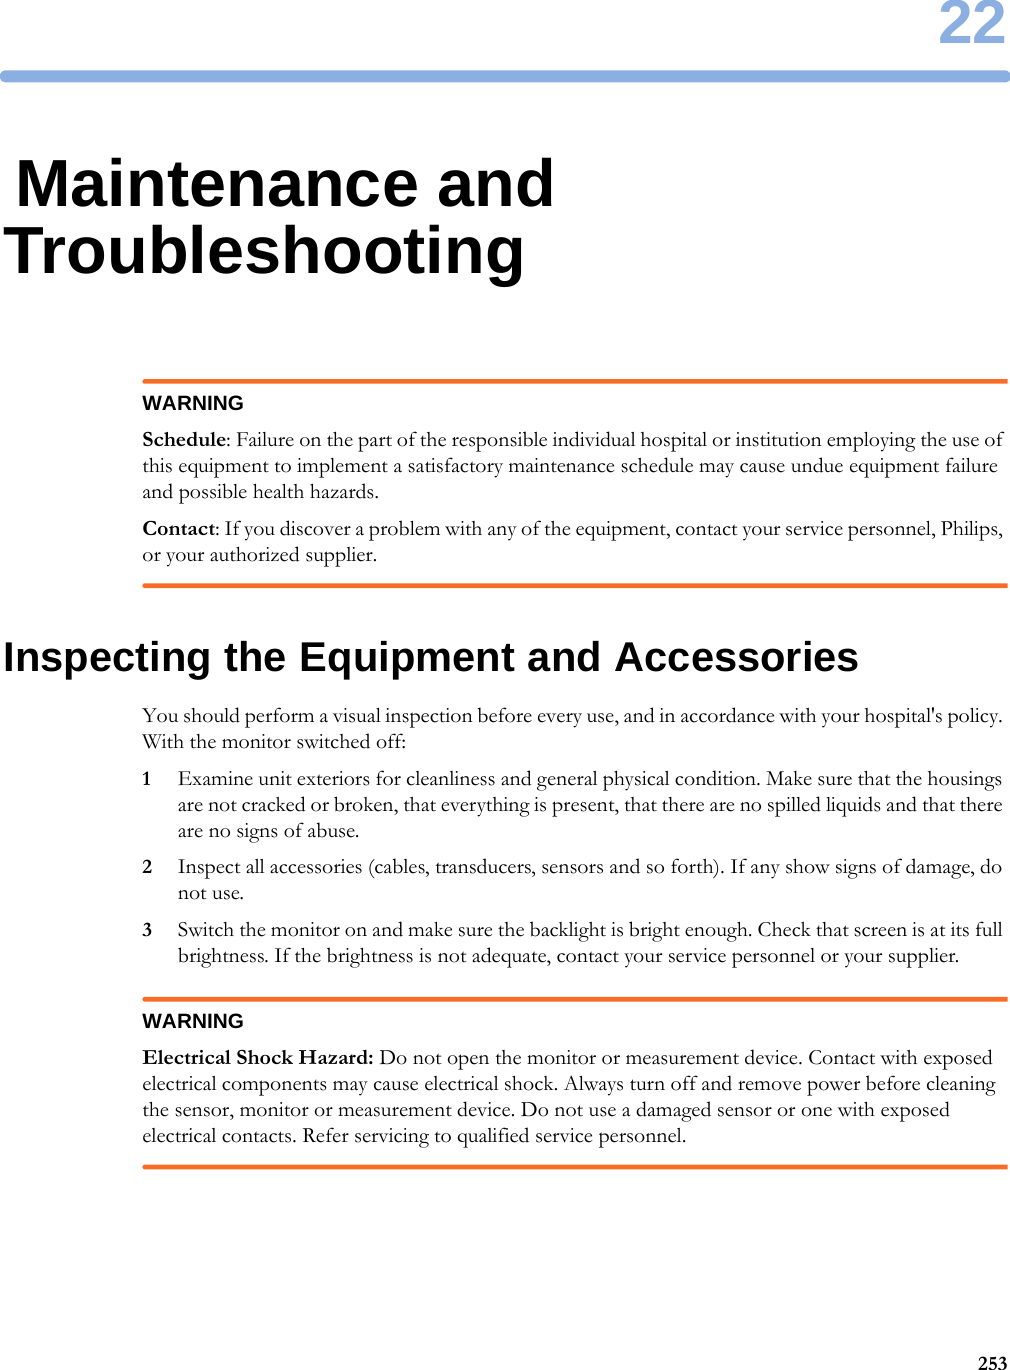 2225322Maintenance and TroubleshootingWARNINGSchedule: Failure on the part of the responsible individual hospital or institution employing the use of this equipment to implement a satisfactory maintenance schedule may cause undue equipment failure and possible health hazards.Contact: If you discover a problem with any of the equipment, contact your service personnel, Philips, or your authorized supplier.Inspecting the Equipment and AccessoriesYou should perform a visual inspection before every use, and in accordance with your hospital&apos;s policy. With the monitor switched off:1Examine unit exteriors for cleanliness and general physical condition. Make sure that the housings are not cracked or broken, that everything is present, that there are no spilled liquids and that there are no signs of abuse.2Inspect all accessories (cables, transducers, sensors and so forth). If any show signs of damage, do not use.3Switch the monitor on and make sure the backlight is bright enough. Check that screen is at its full brightness. If the brightness is not adequate, contact your service personnel or your supplier.WARNINGElectrical Shock Hazard: Do not open the monitor or measurement device. Contact with exposed electrical components may cause electrical shock. Always turn off and remove power before cleaning the sensor, monitor or measurement device. Do not use a damaged sensor or one with exposed electrical contacts. Refer servicing to qualified service personnel.